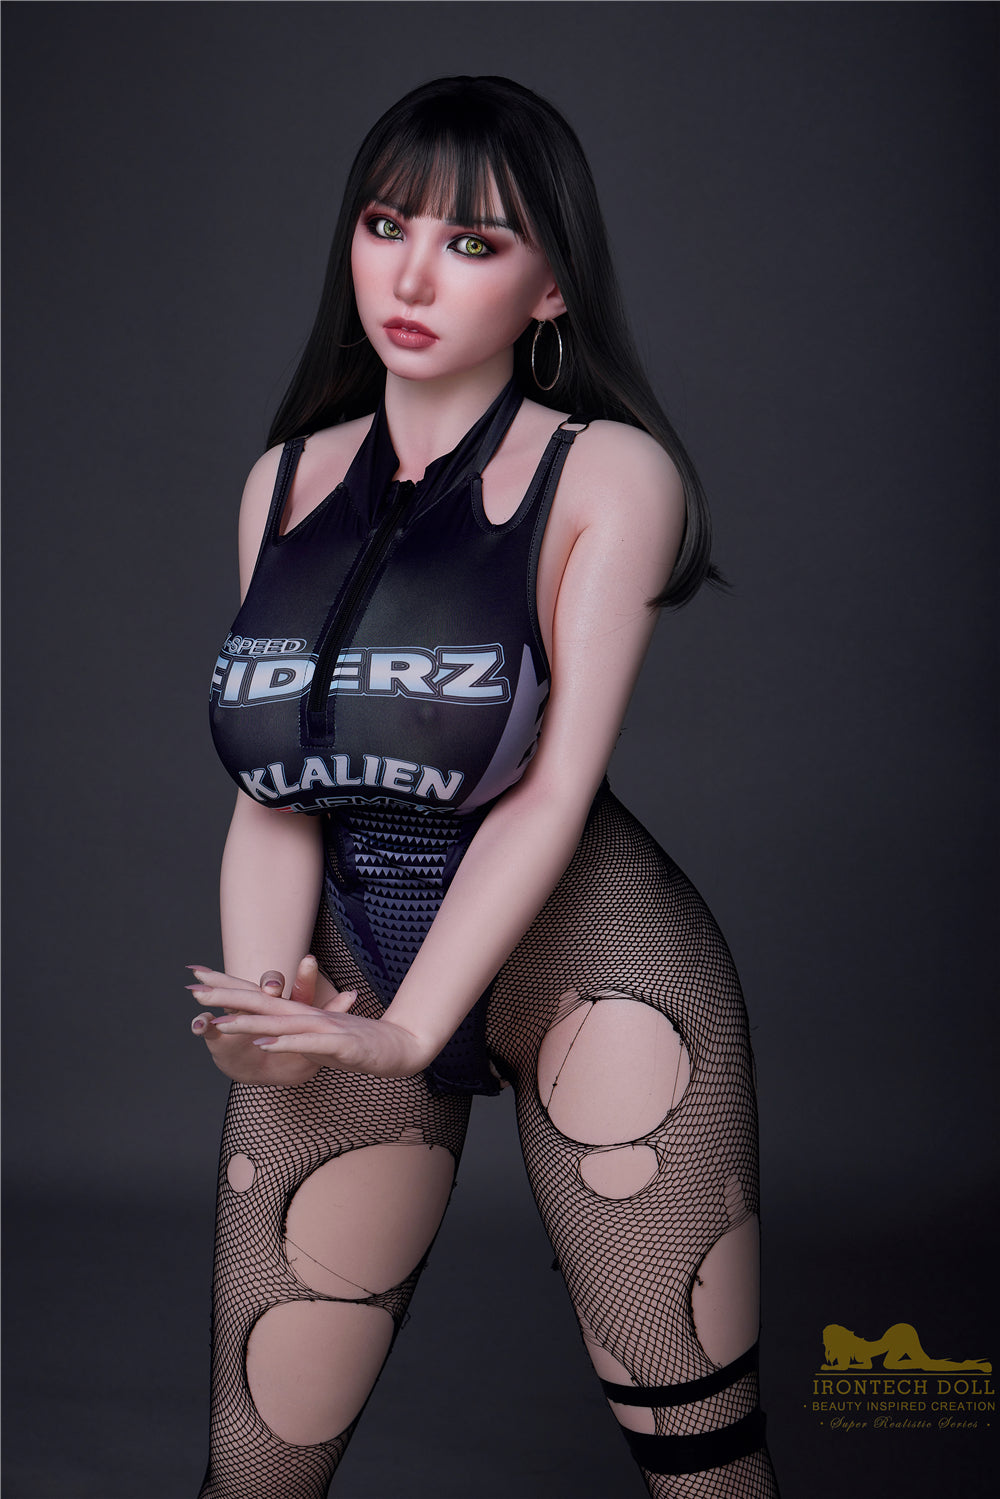 Irontech Doll 162 cm Silicone - Suki | Buy Sex Dolls at DOLLS ACTUALLY